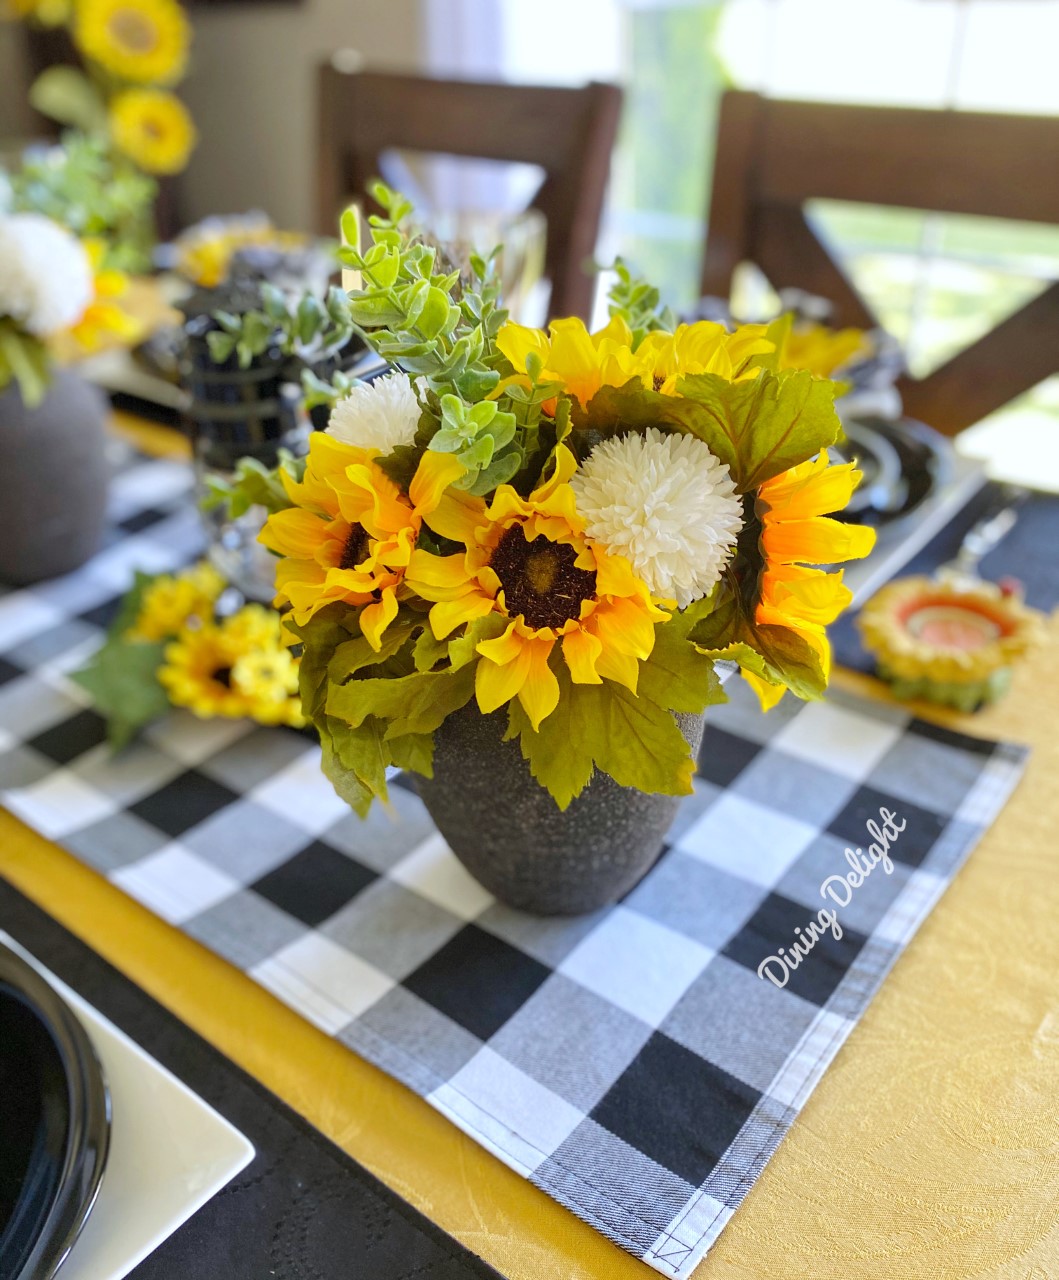 Buffalo Plaid &sunflower Kitchen Decor, Black and White Plaid Bow and  Yellow Sunflower, Thanksgiving Chair Decorations Withribbontie-back 